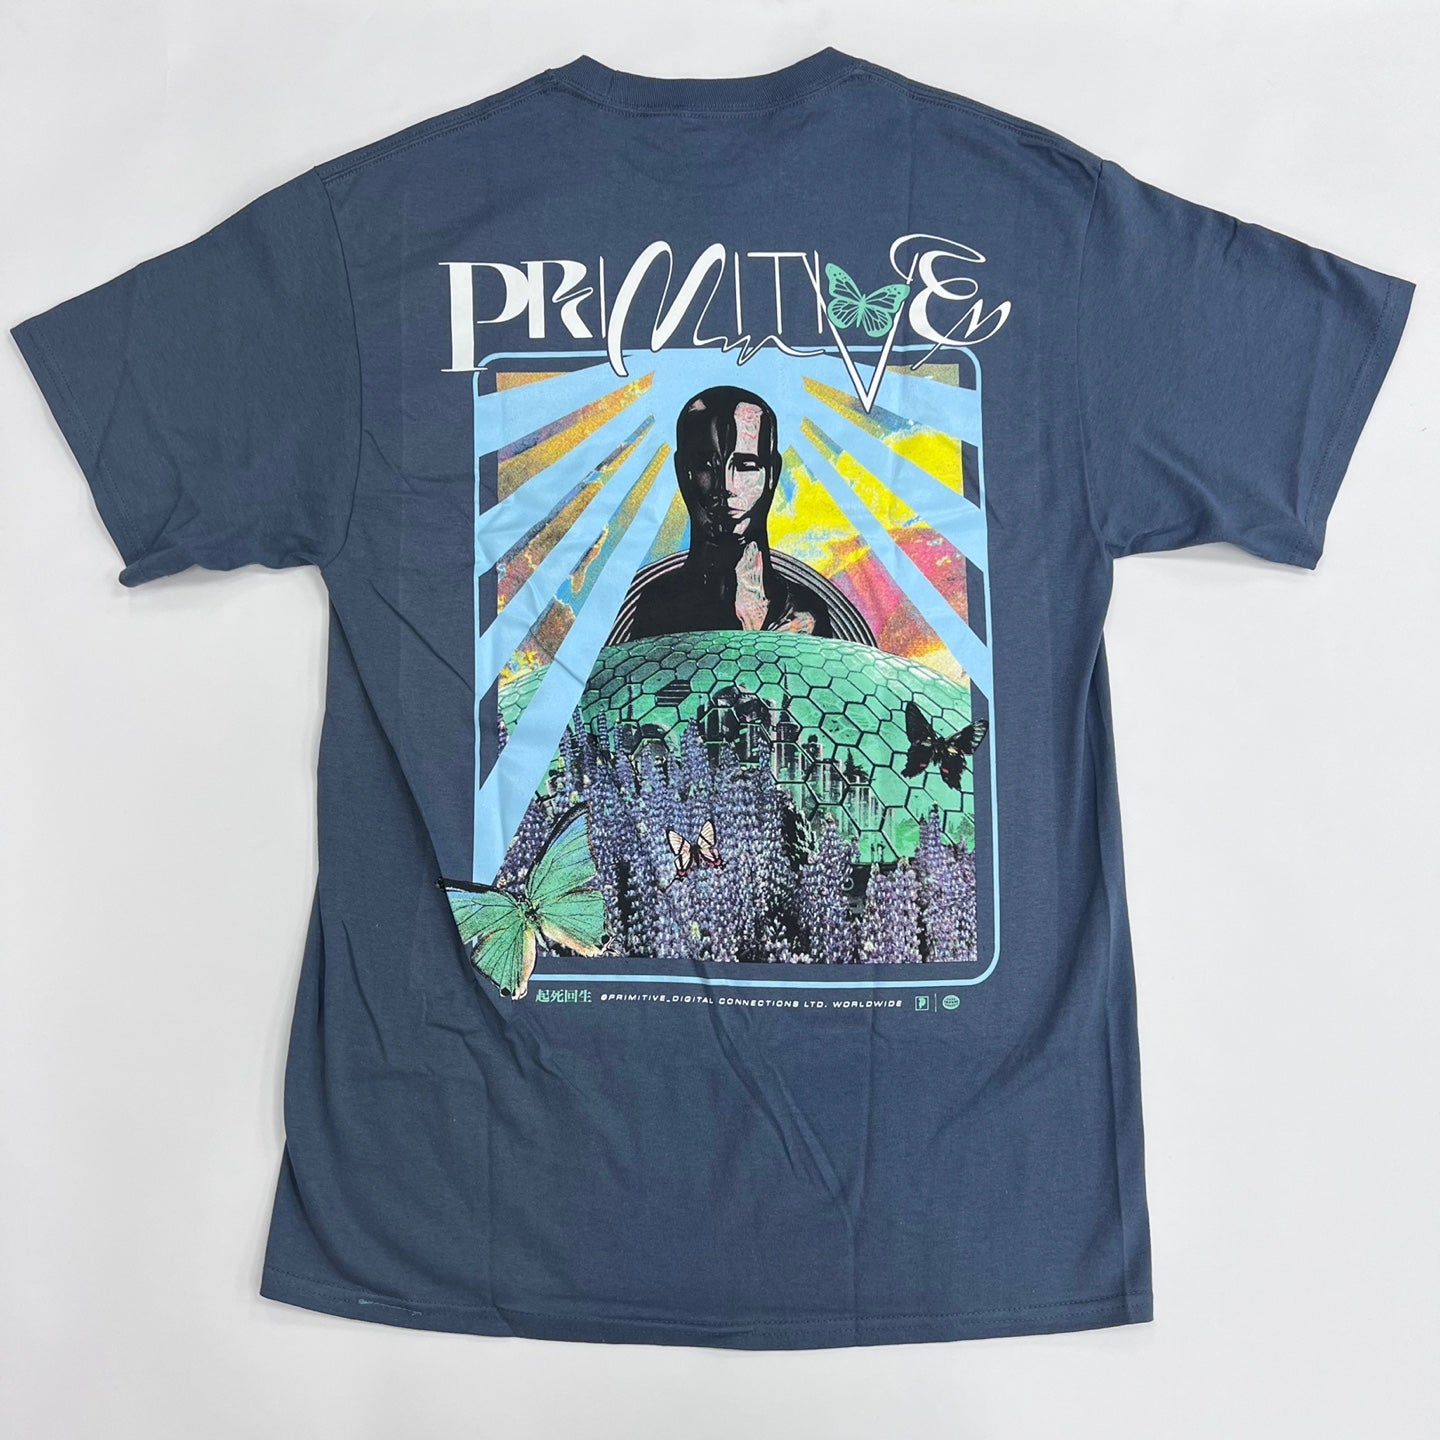 Primitive Wired Graphic T-Shirt